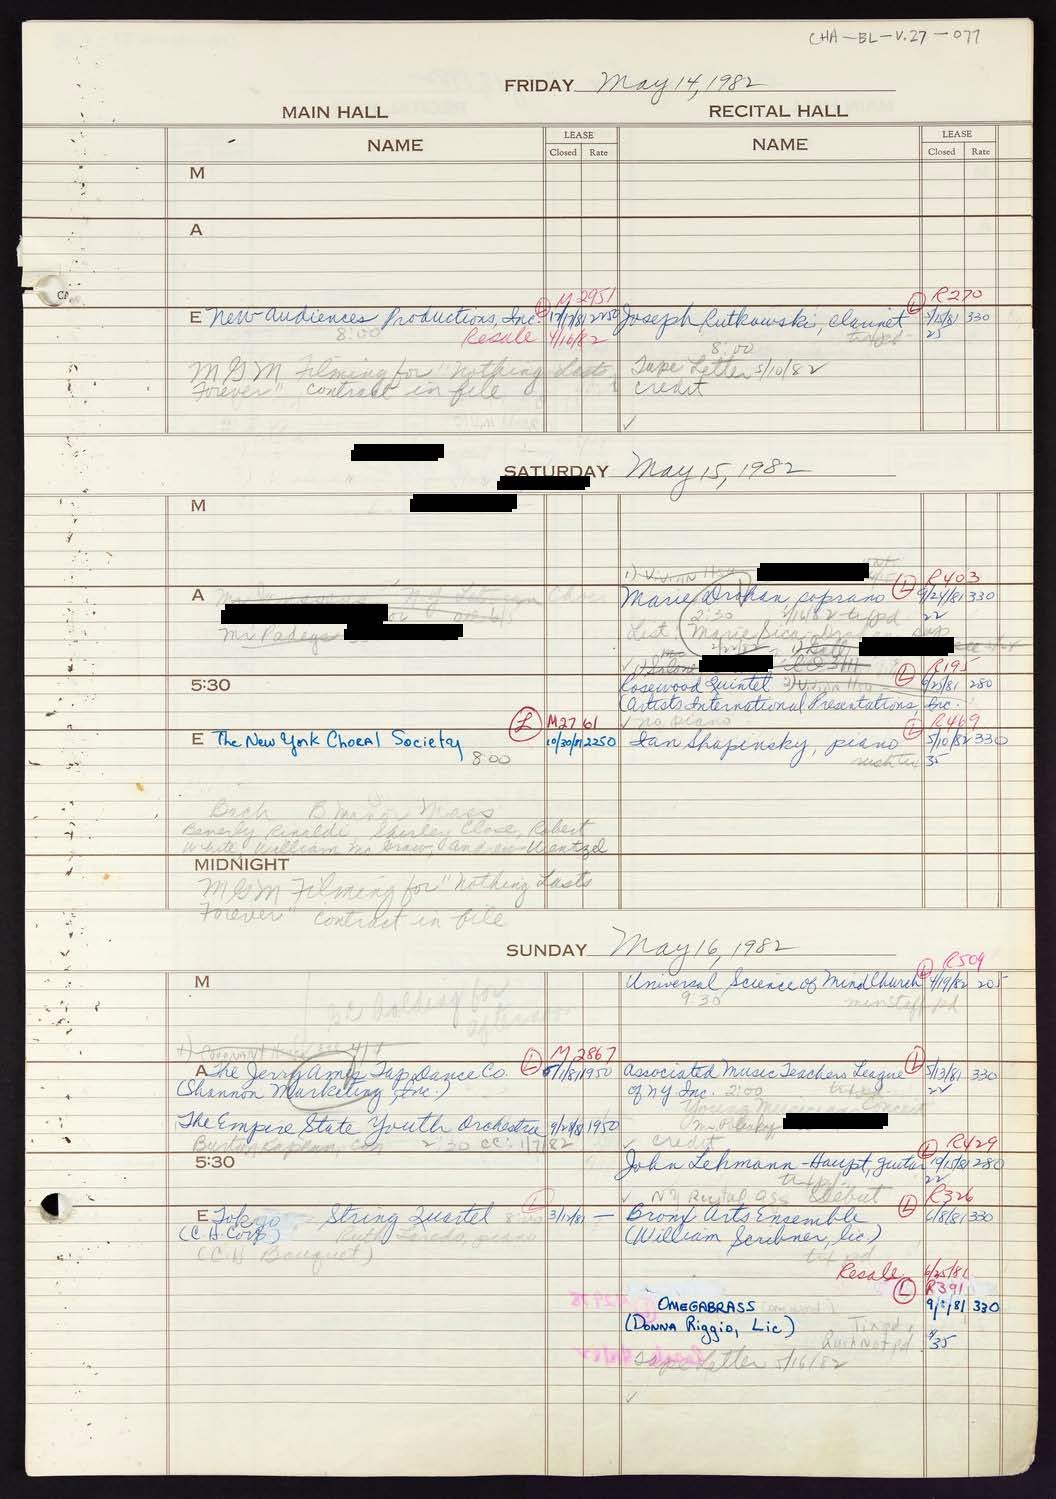 Carnegie Hall Booking Ledger, volume 27, page 77